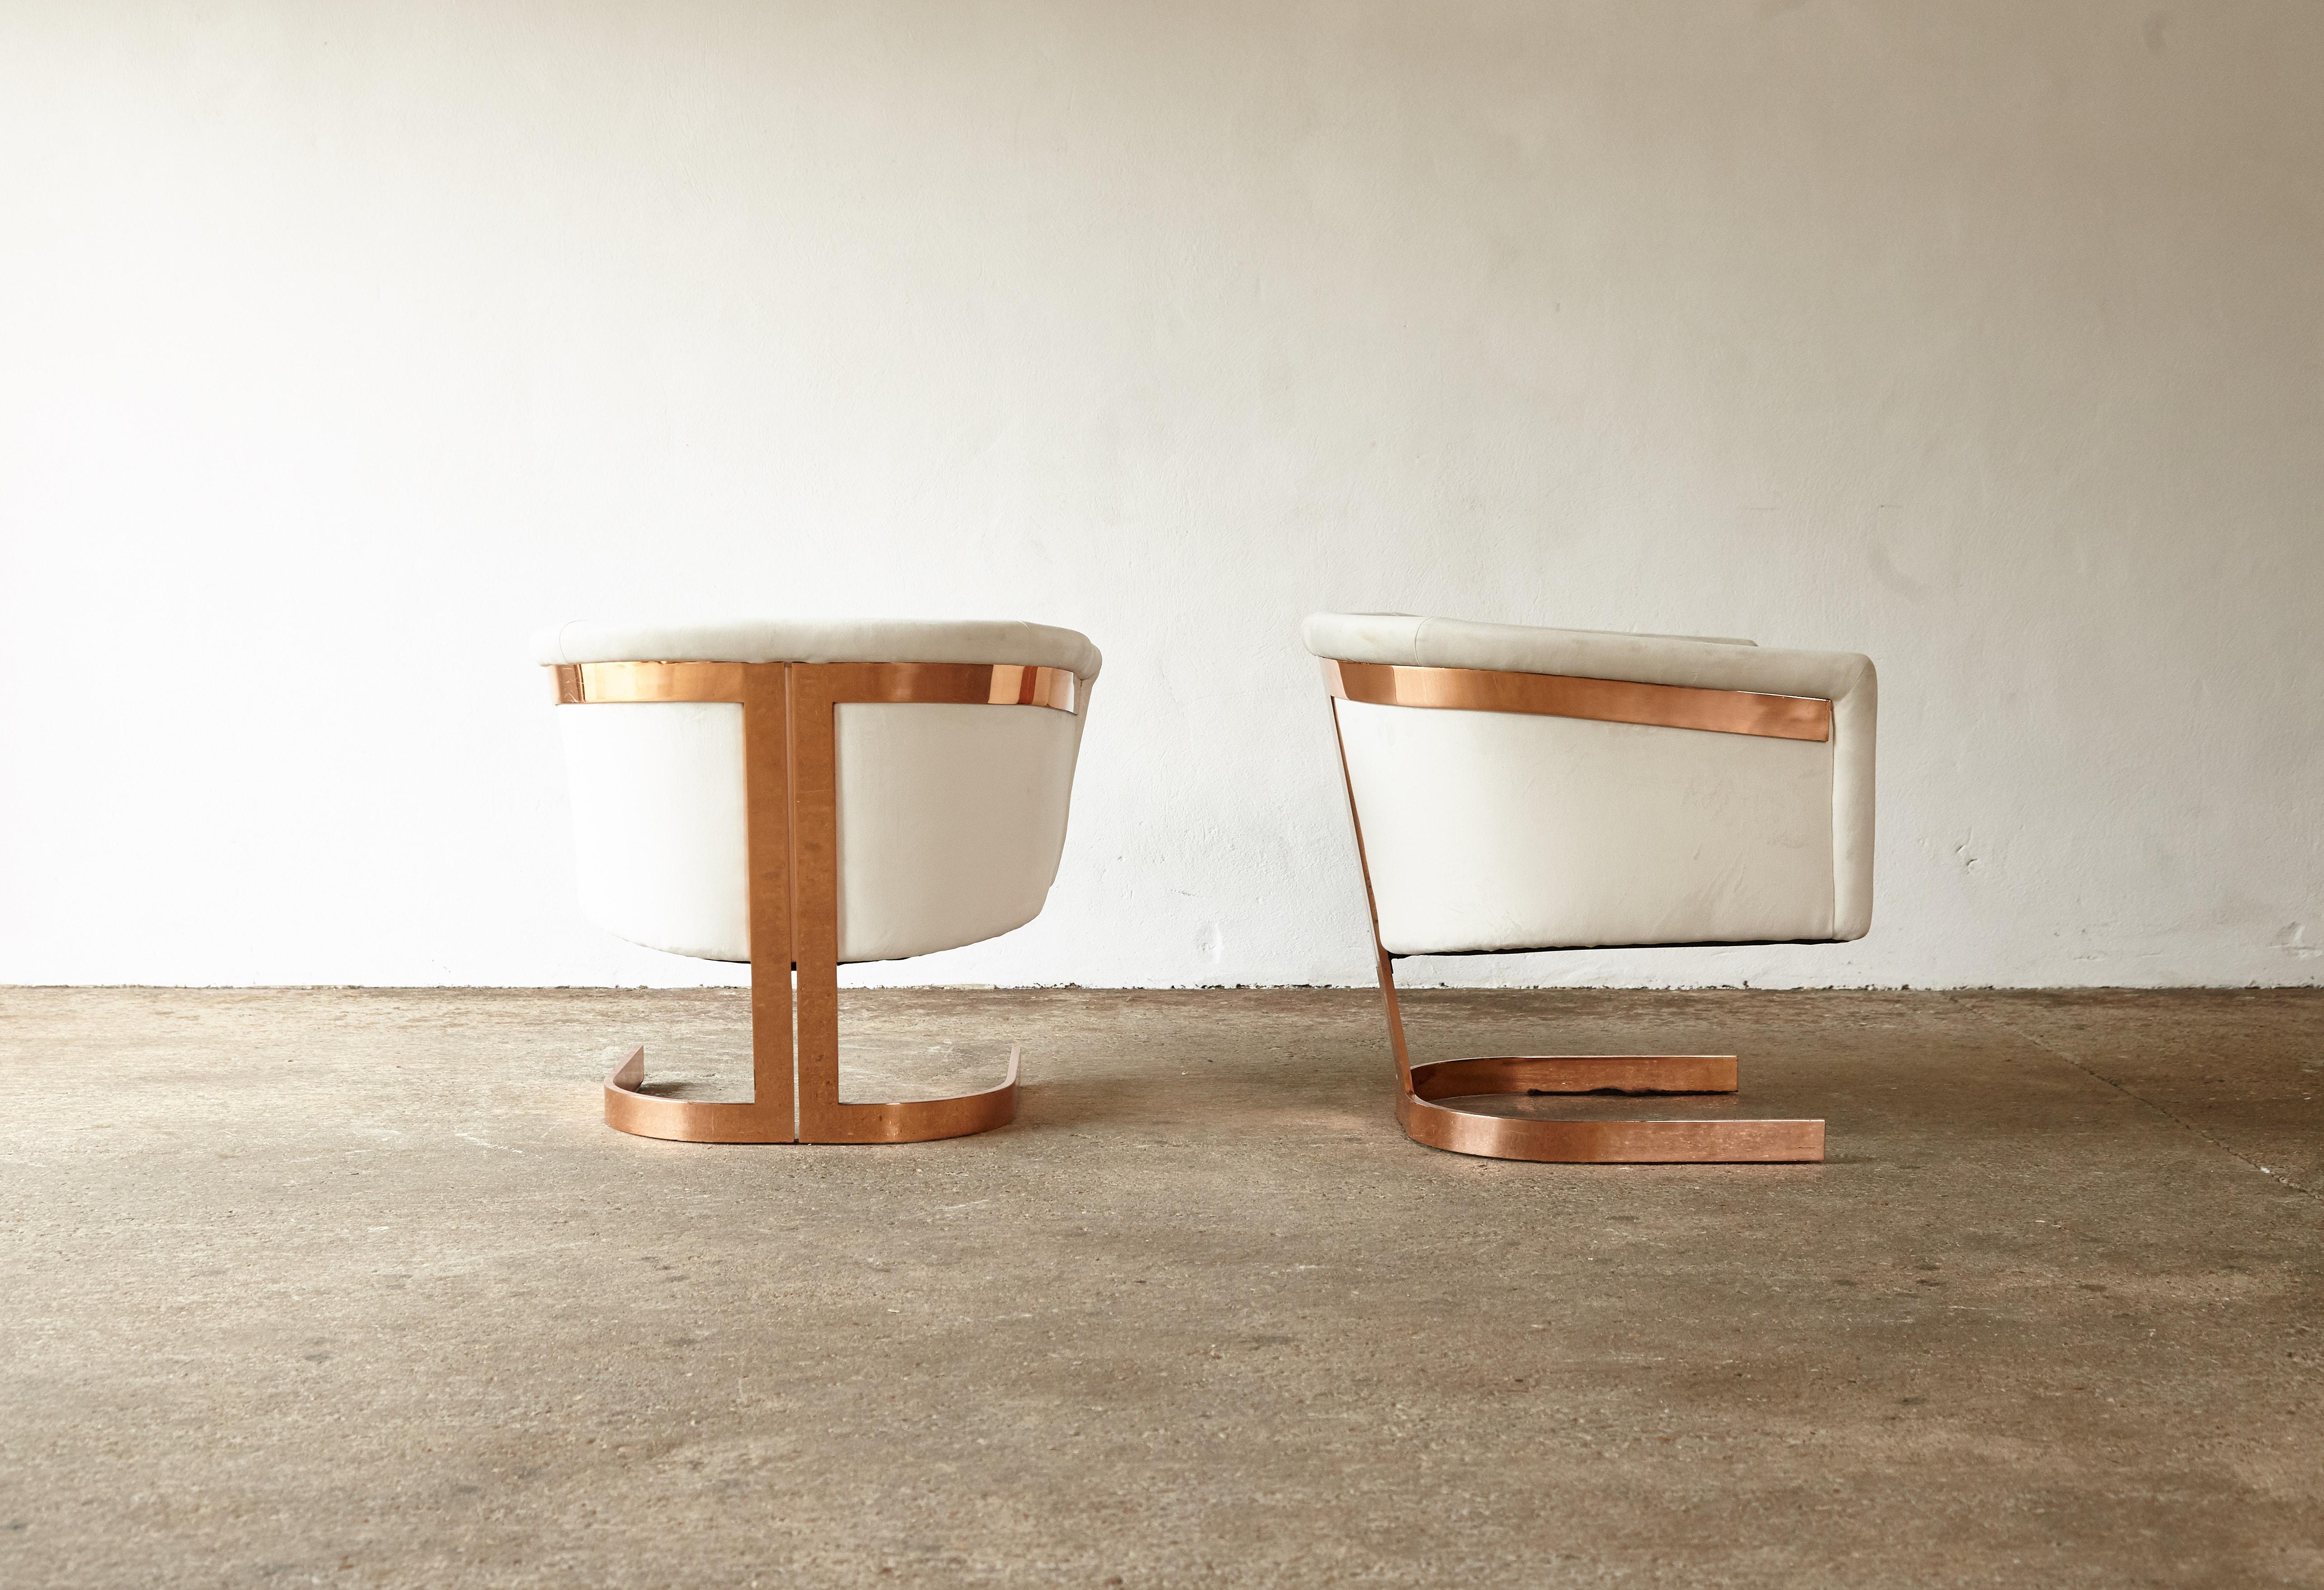 Fabric Pair of Copper Framed Cantilevered Chairs, 1970s / Milo Baughman Style, USA